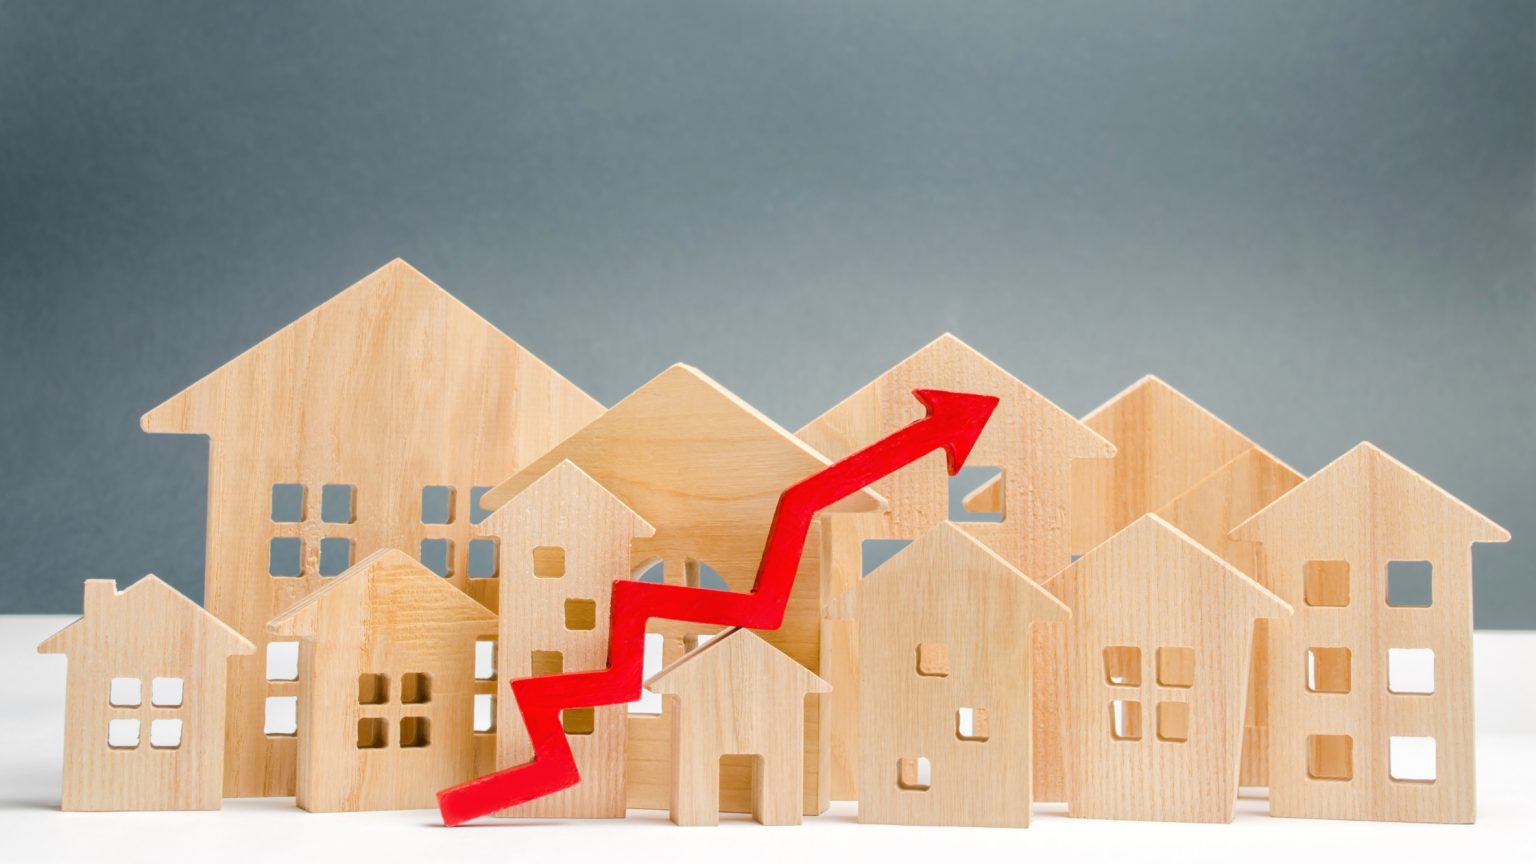 House figurines and red increasing arrow to show FHA loan limit increase.